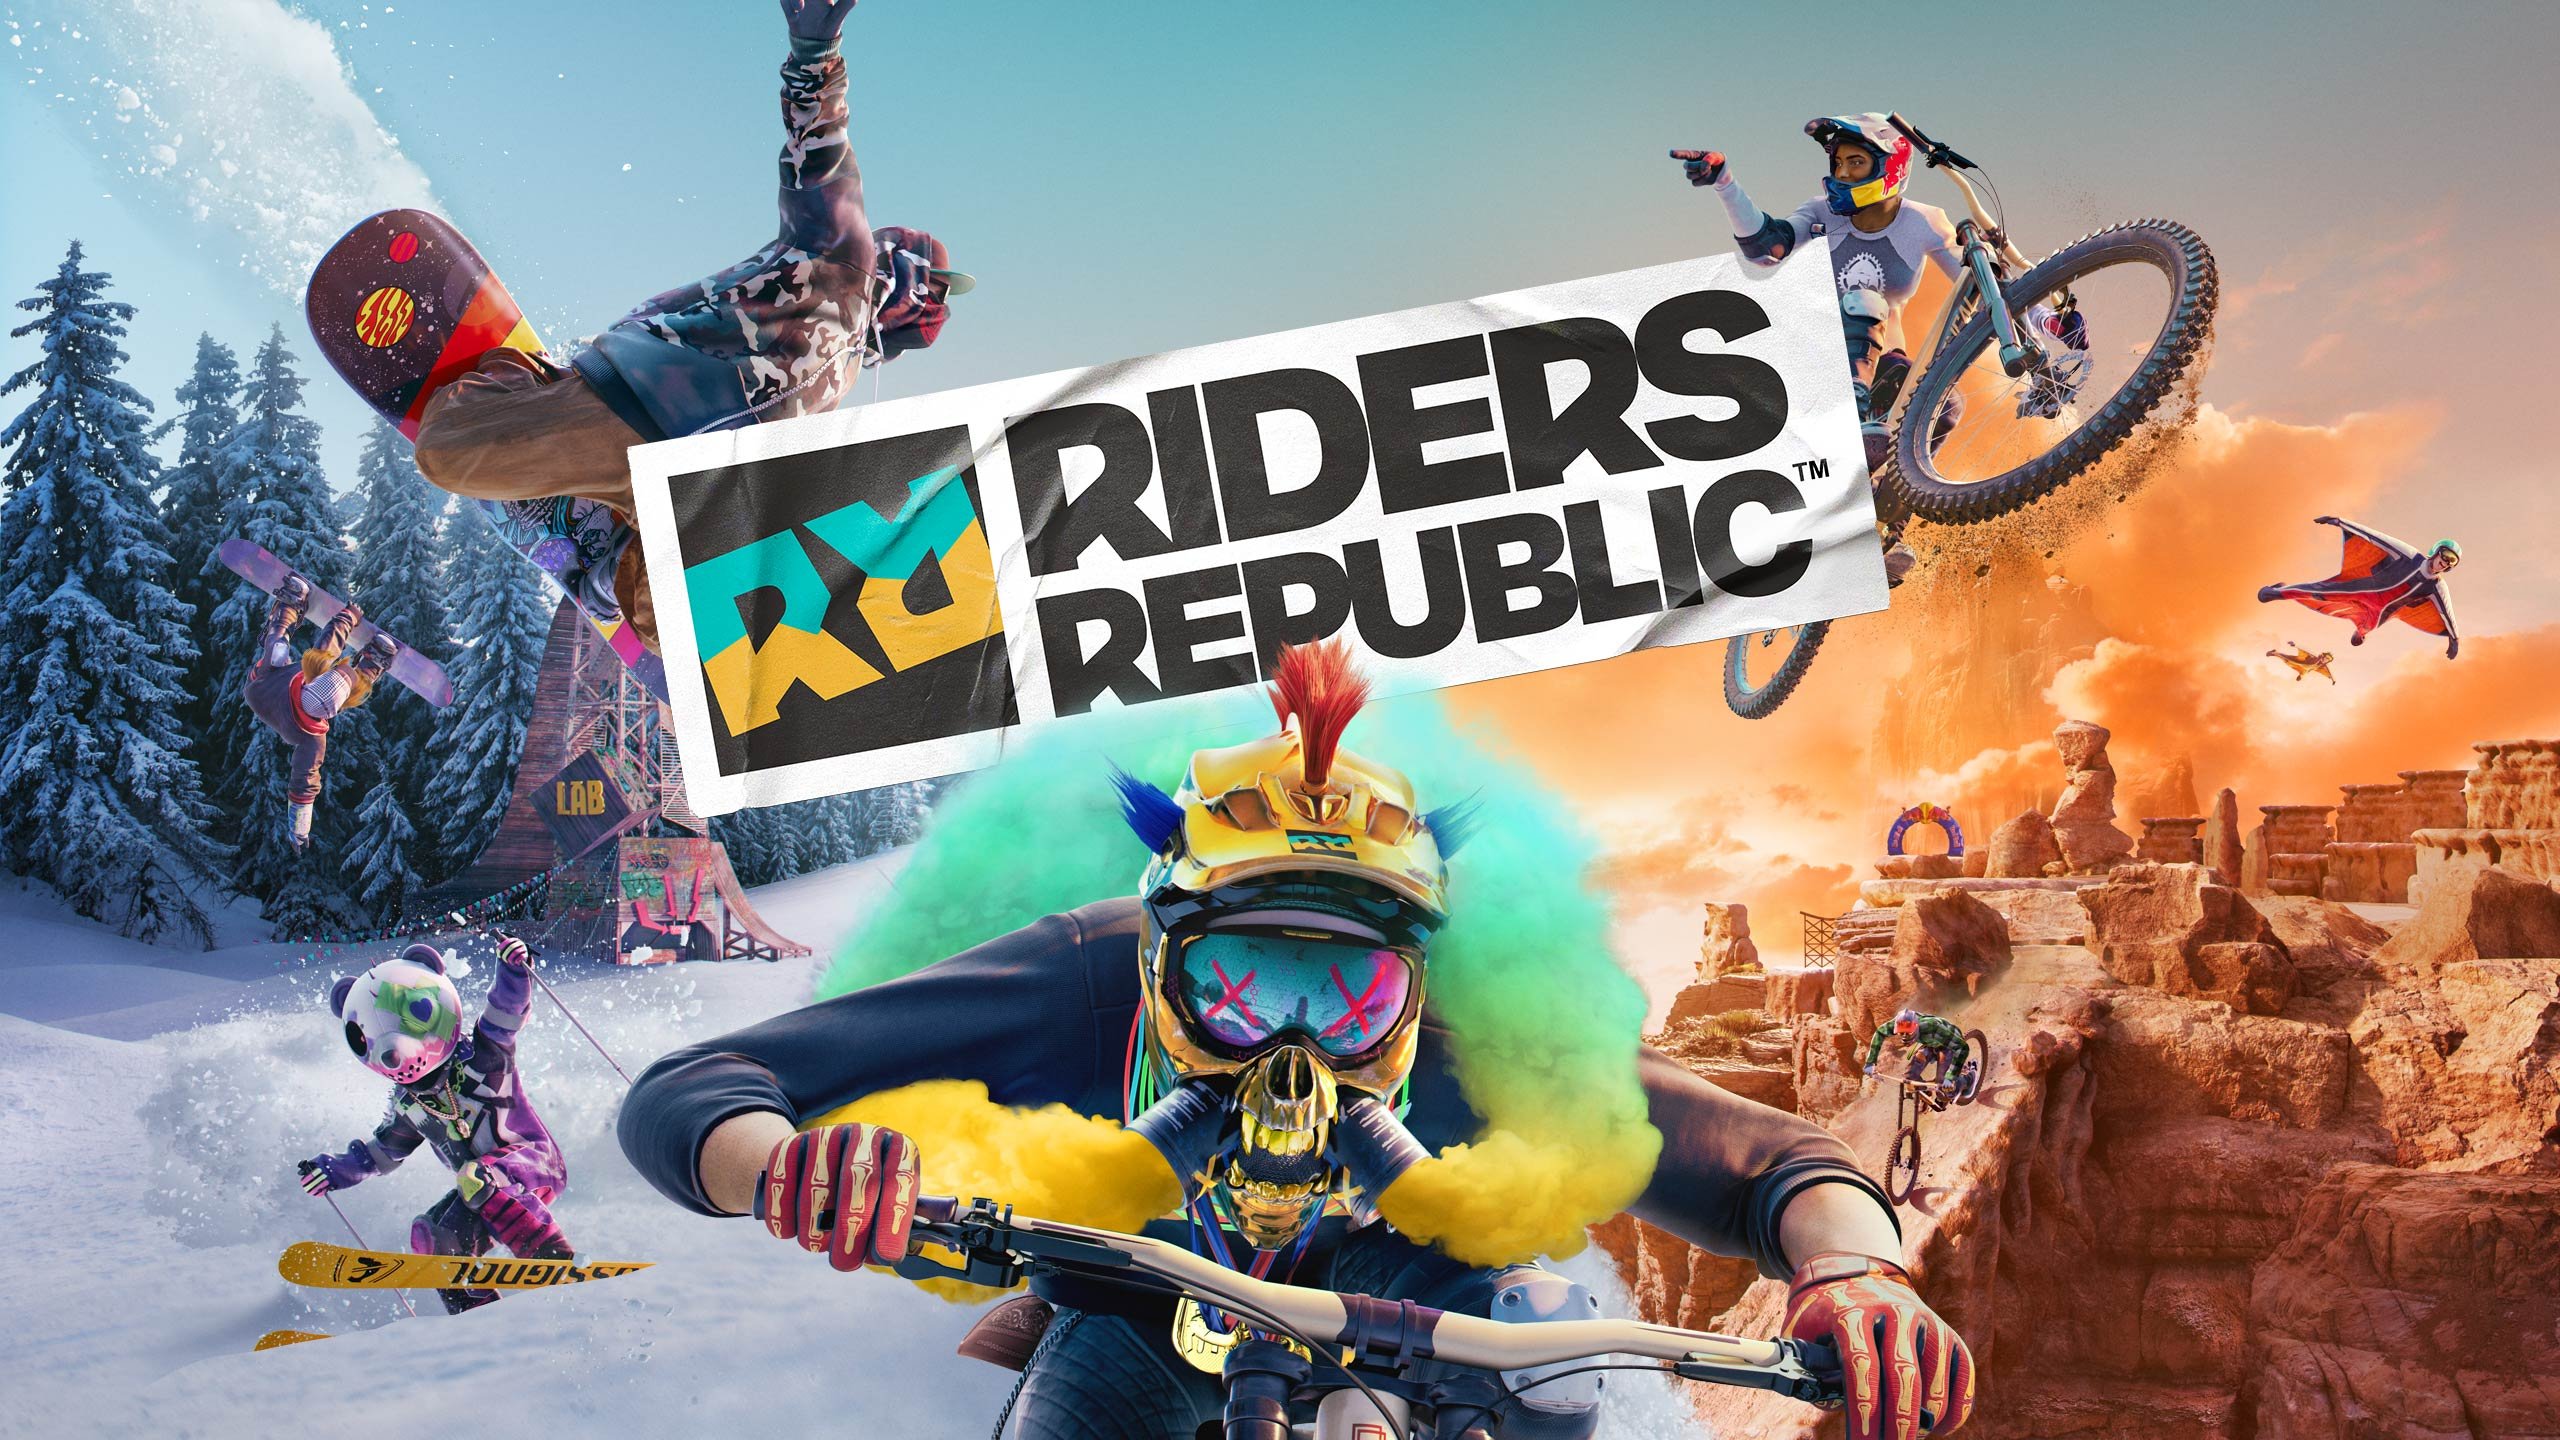 A new trailer for Riders Republic has appeared on the network